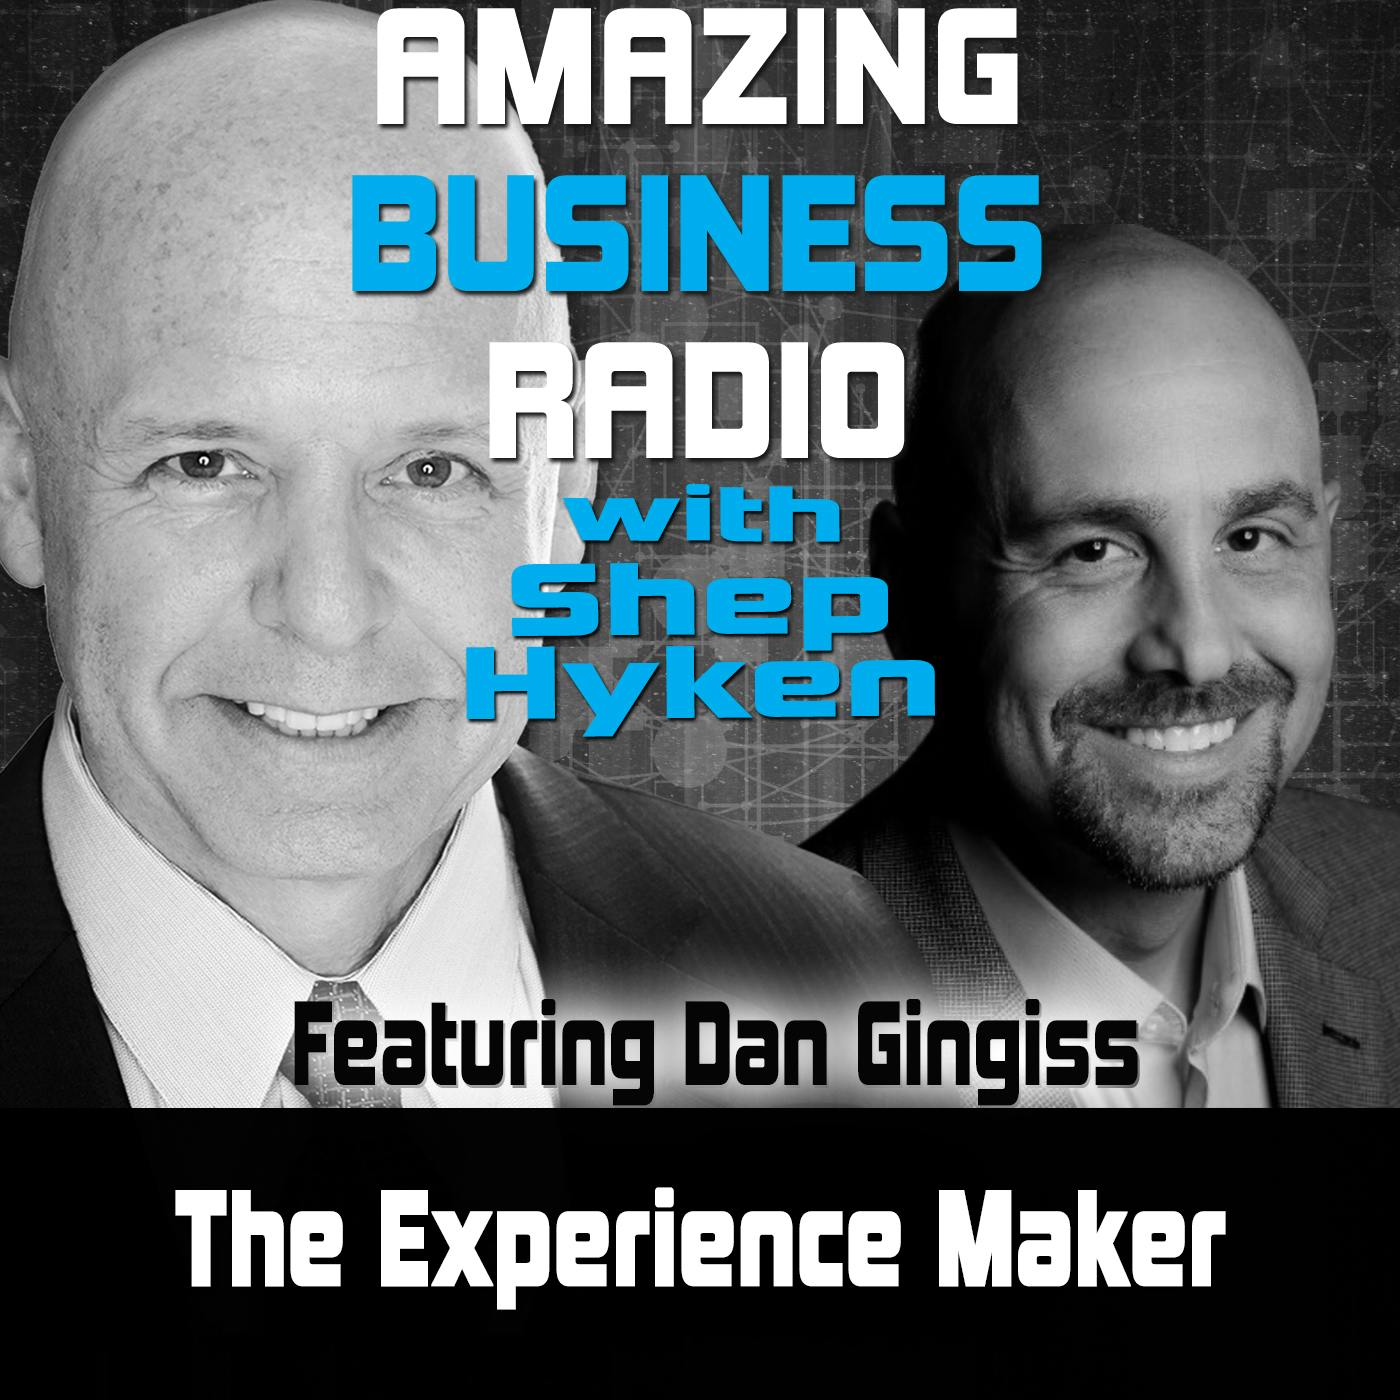 The Experience Maker Featuring Dan Gingiss